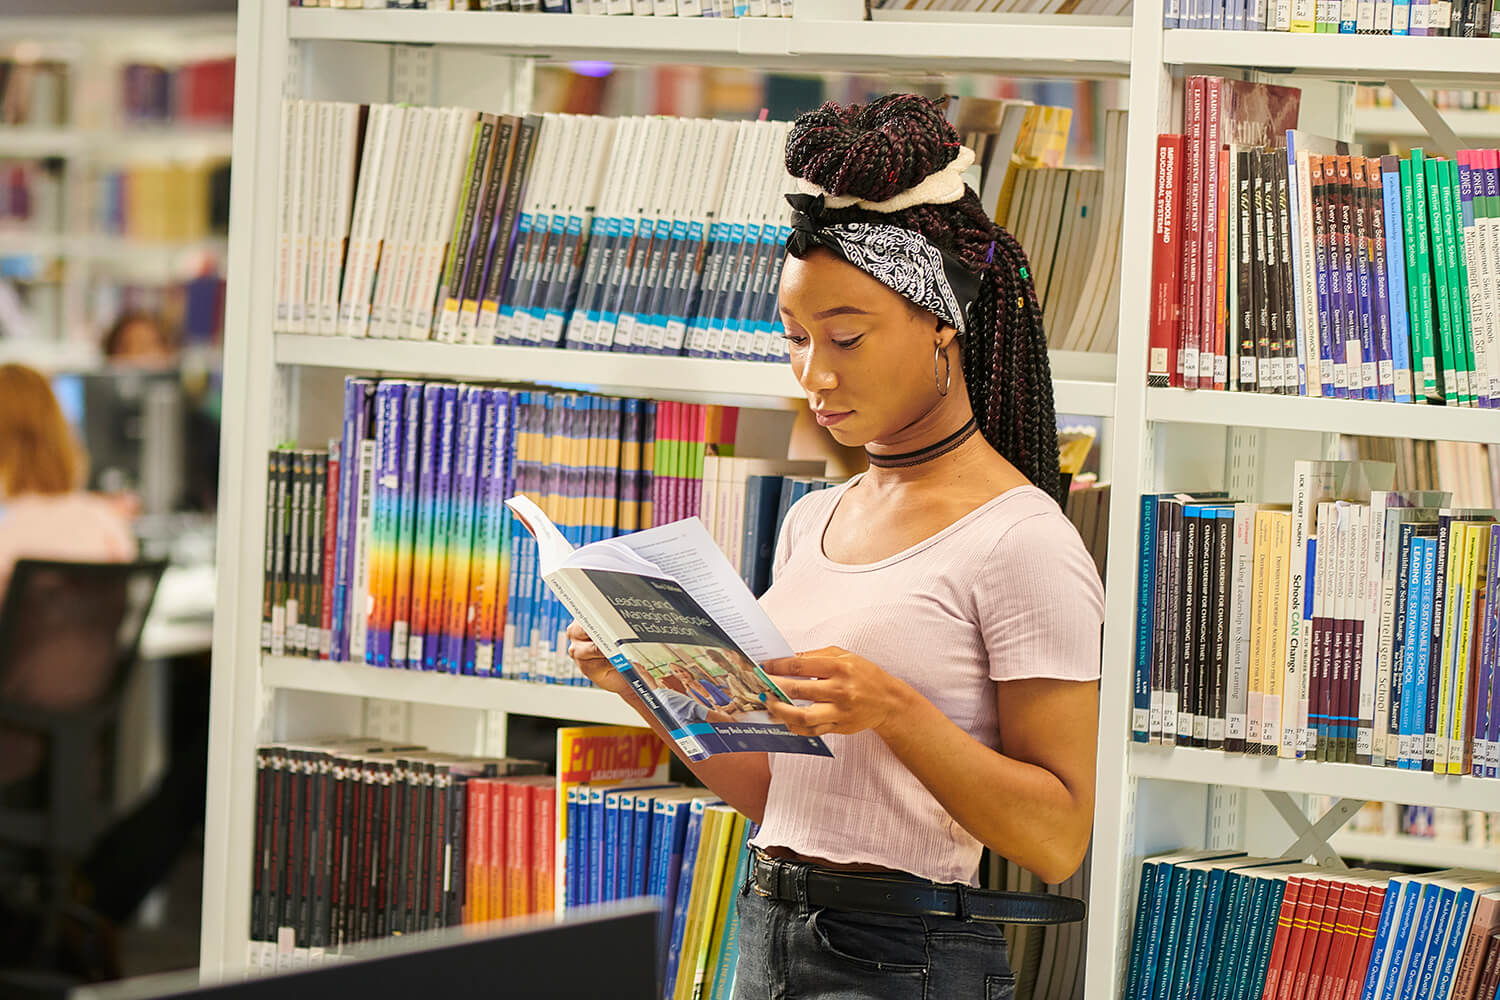 A student browses a book while stood in the University library.